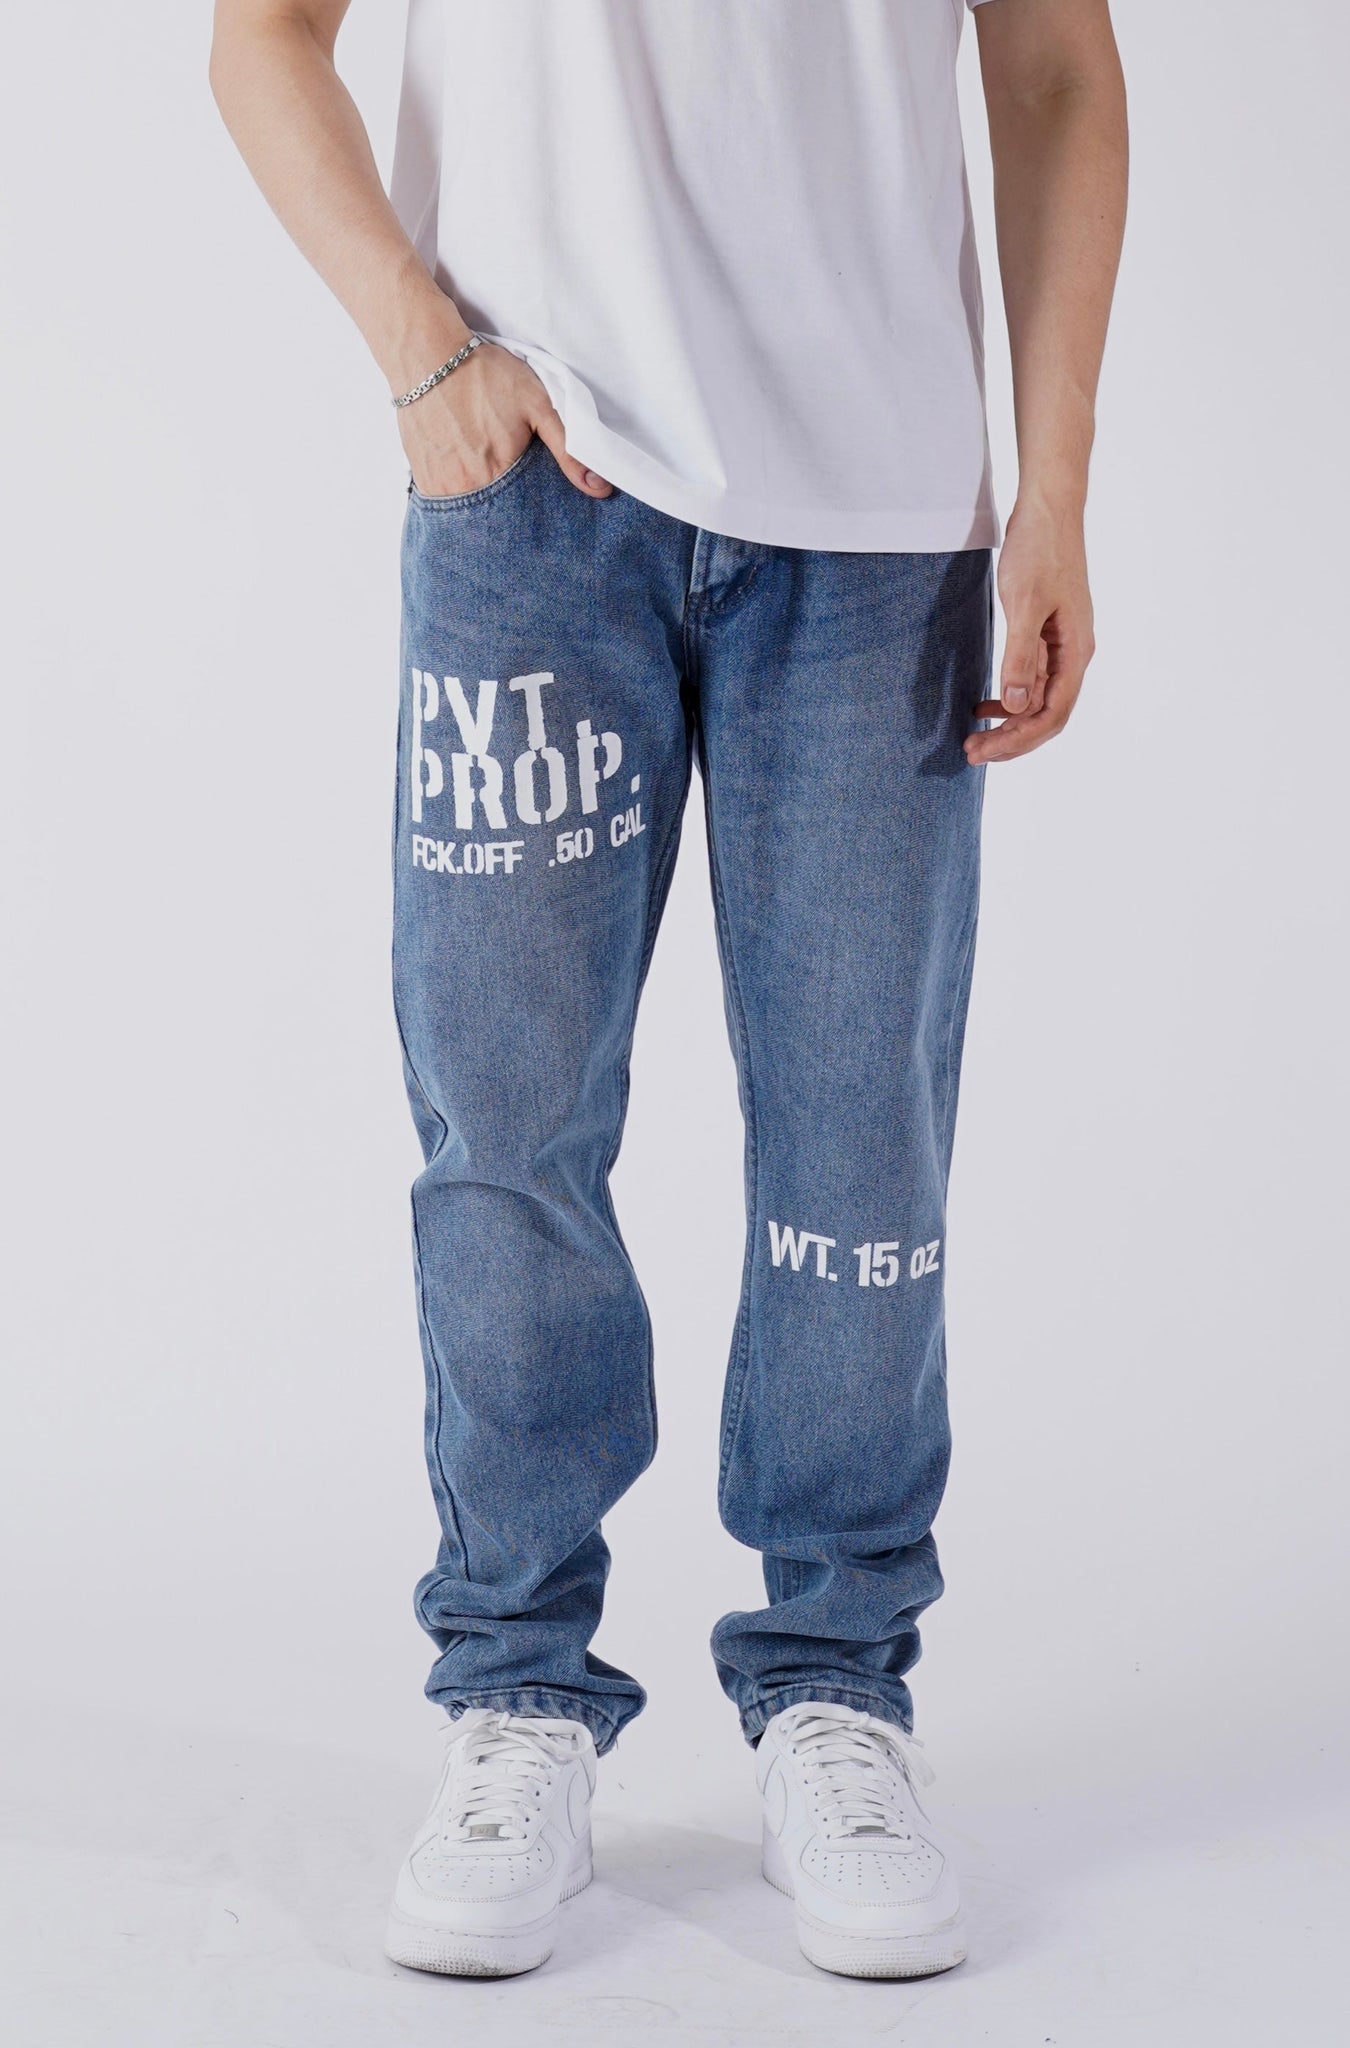 PRIVATE PROPERTY JEANS